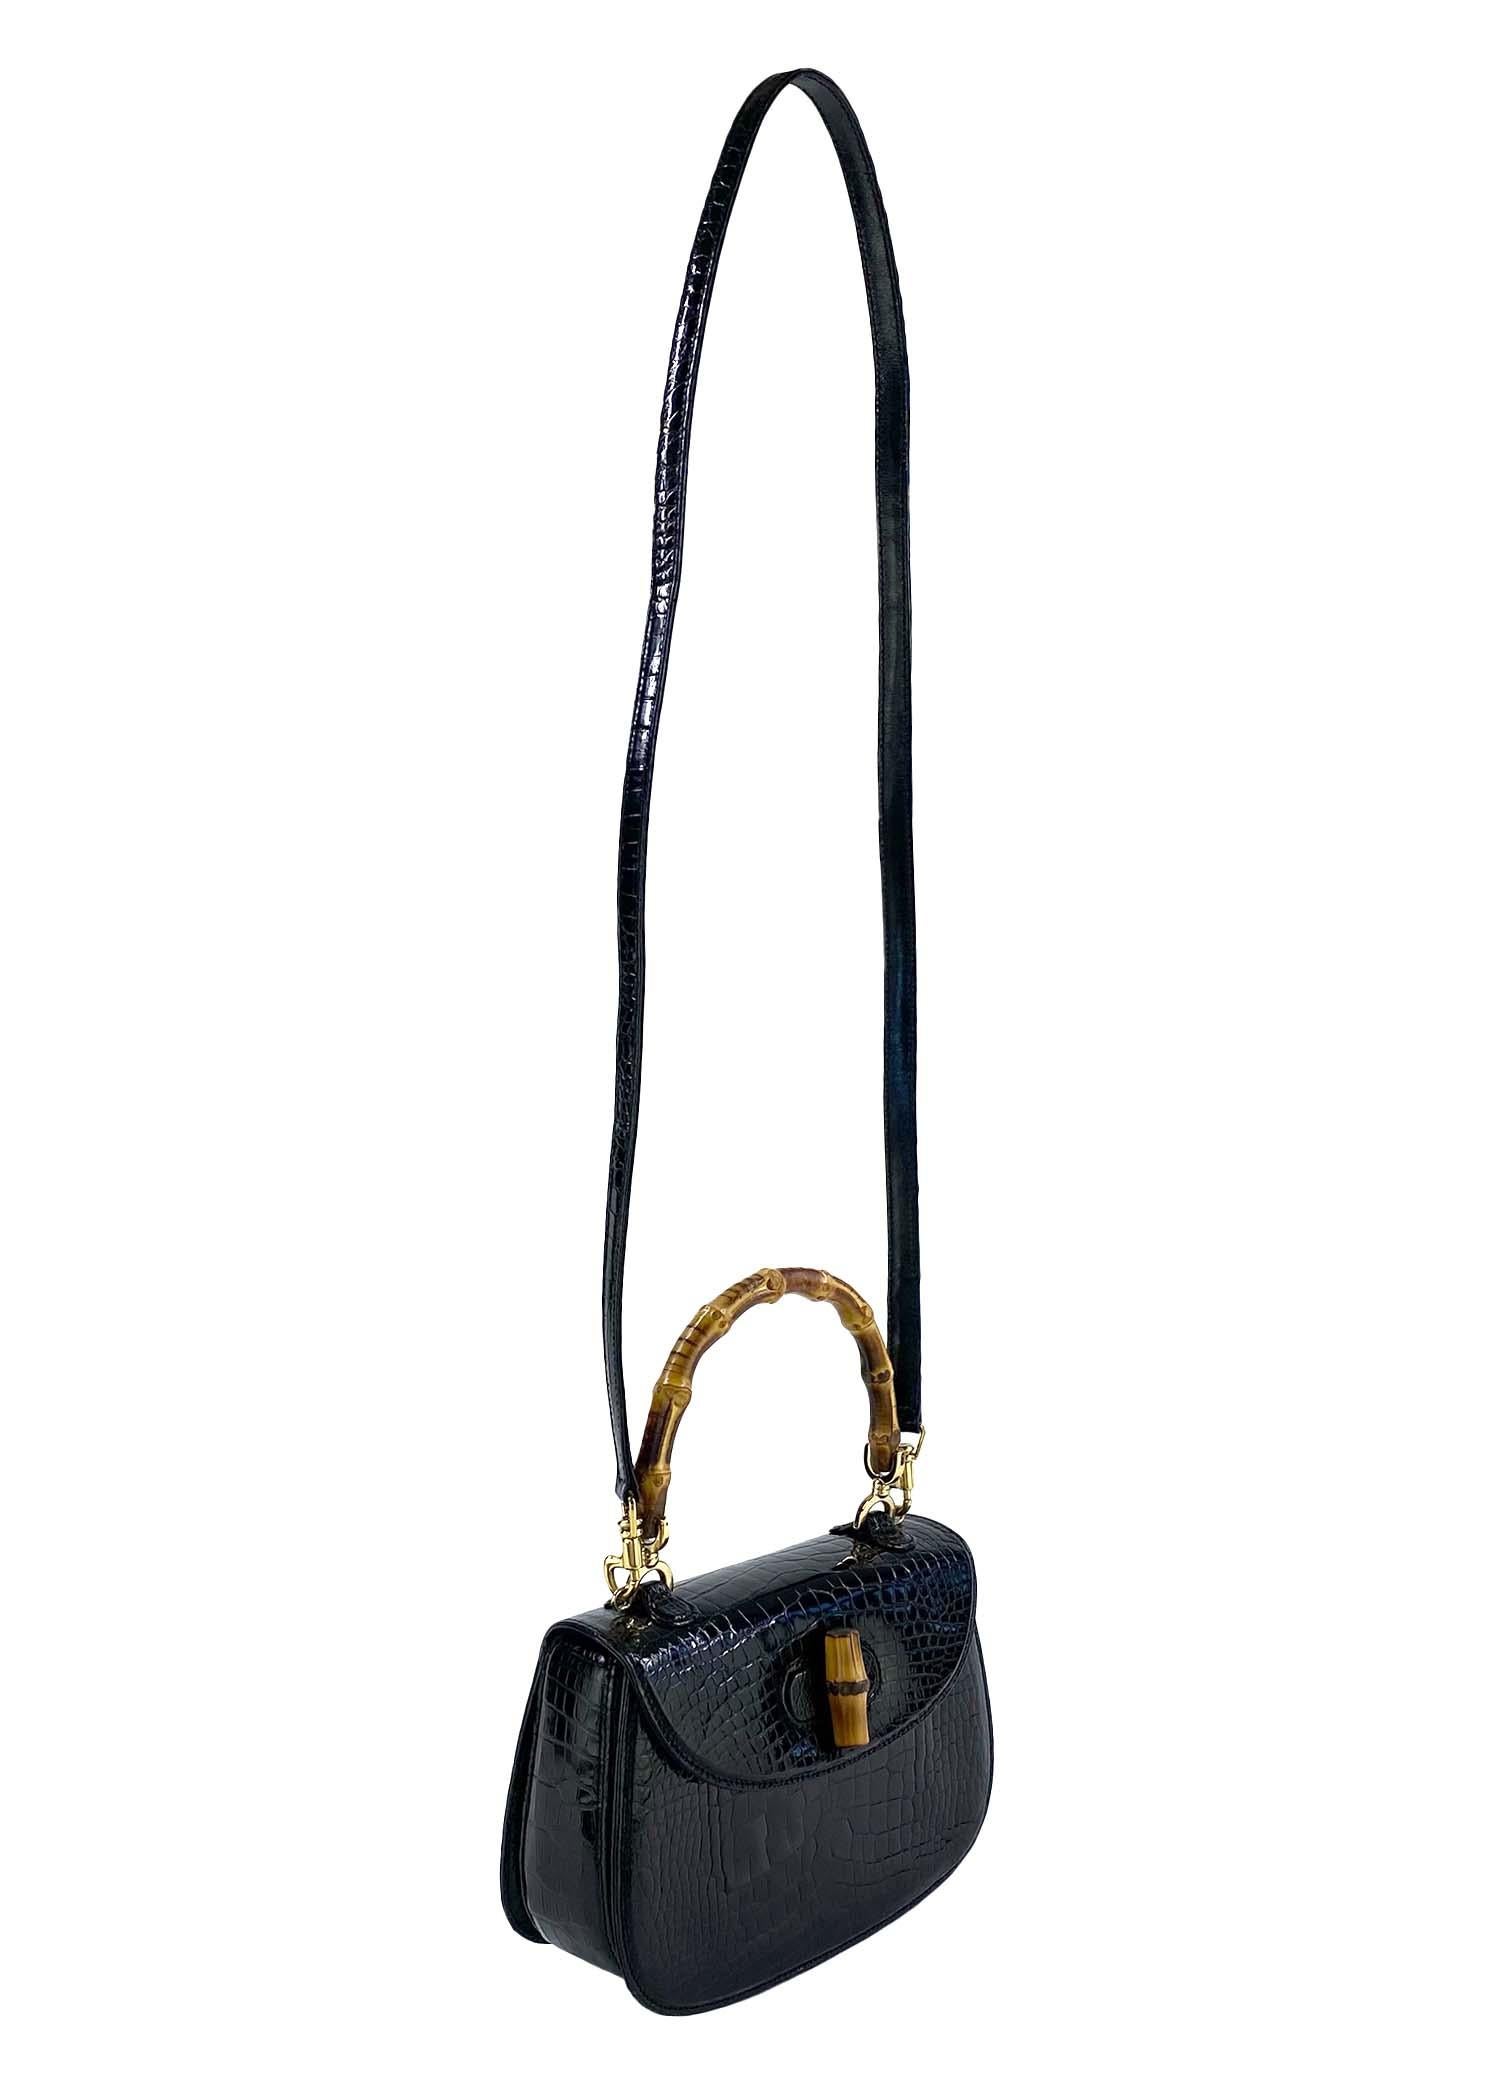 TheRealList presents: a classic Gucci bamboo top handle bag in a rare small size with its original crossbody strap in matching black alligator. The bamboo top handle style first debuted in 1947 and gained popularity after being used by Ingrid